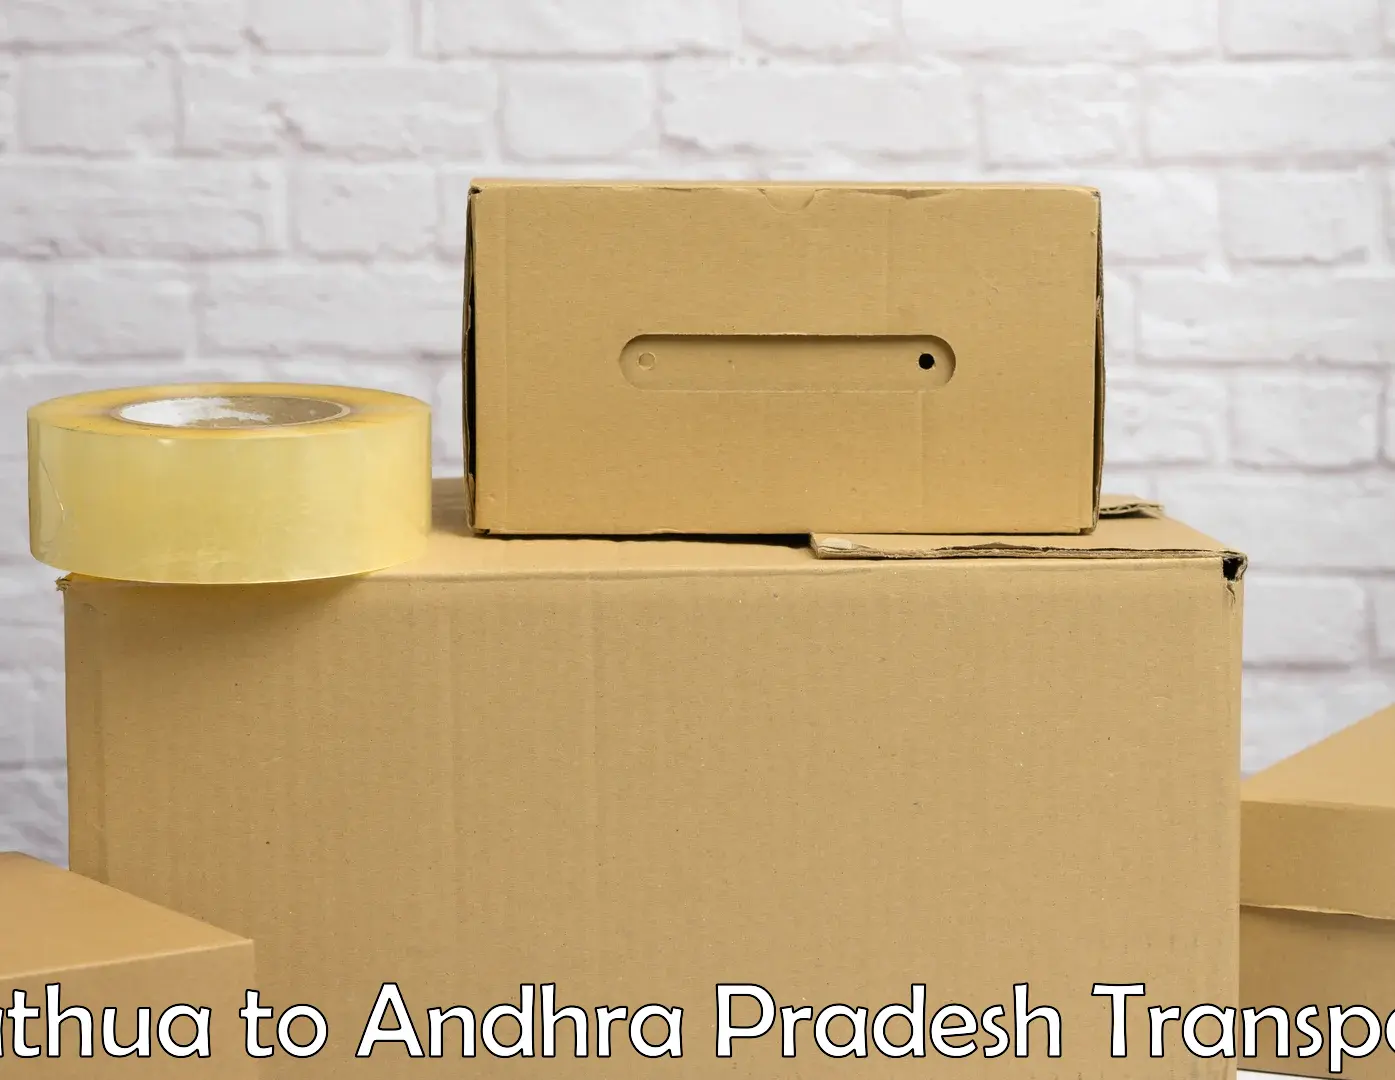 Truck transport companies in India Kathua to Andhra Pradesh